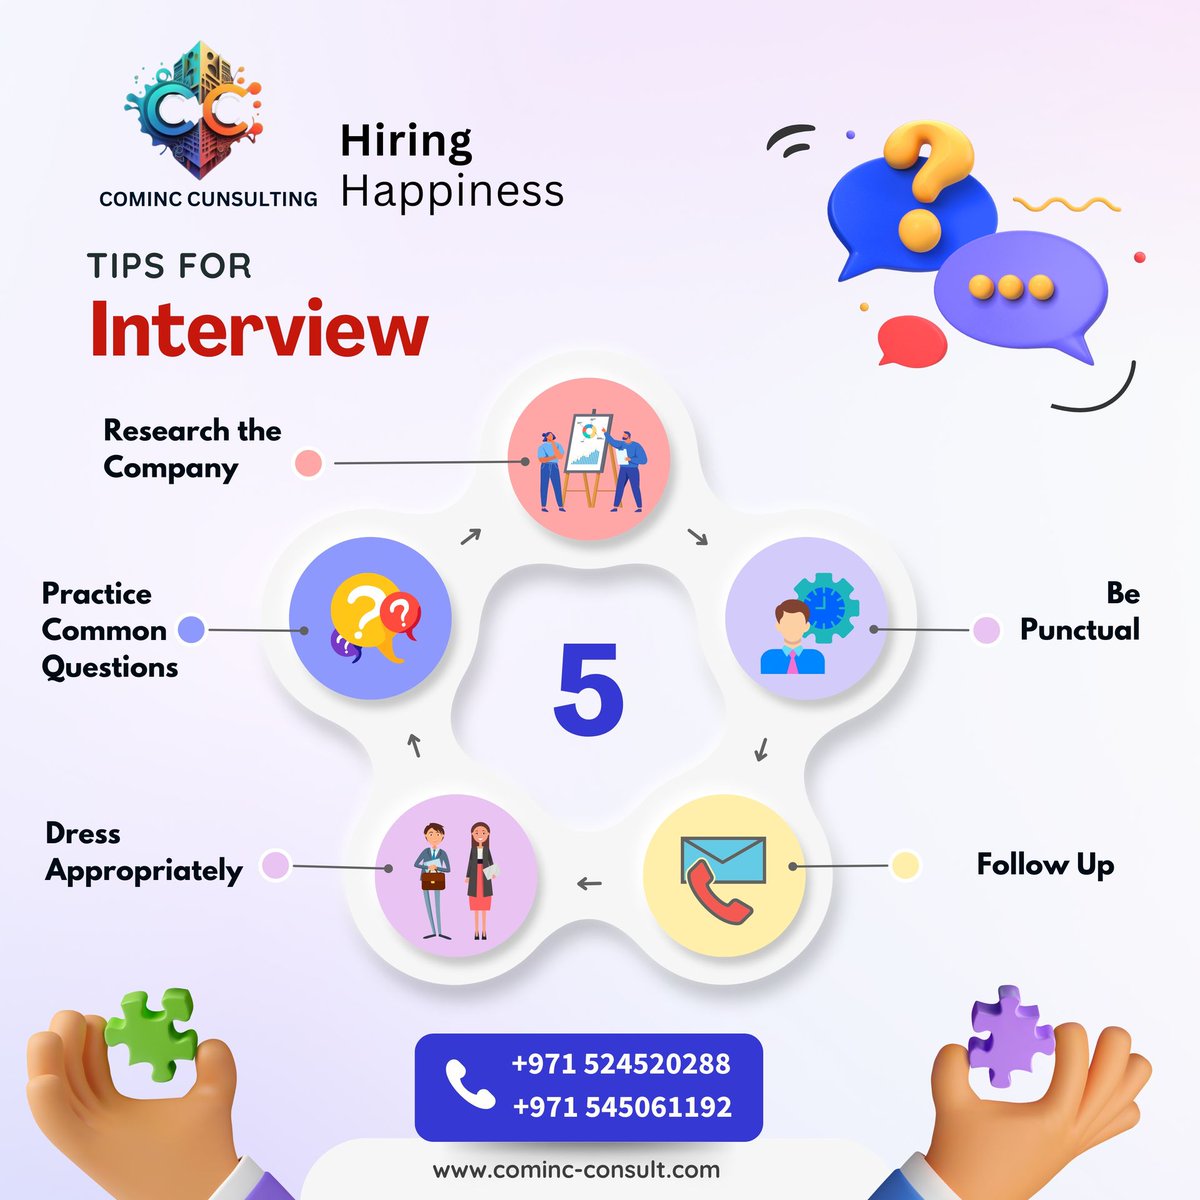 Nervous about your next interview? Don't be! Comic Consulting's got your back with expert advice.

#InterviewPrep #CareerAdvice #JobSearchTips #HiringTips #CareerGoals #ProfessionalGrowth #InterviewSuccess #JobInterview #CareerCoaching #WorkplaceWisdom